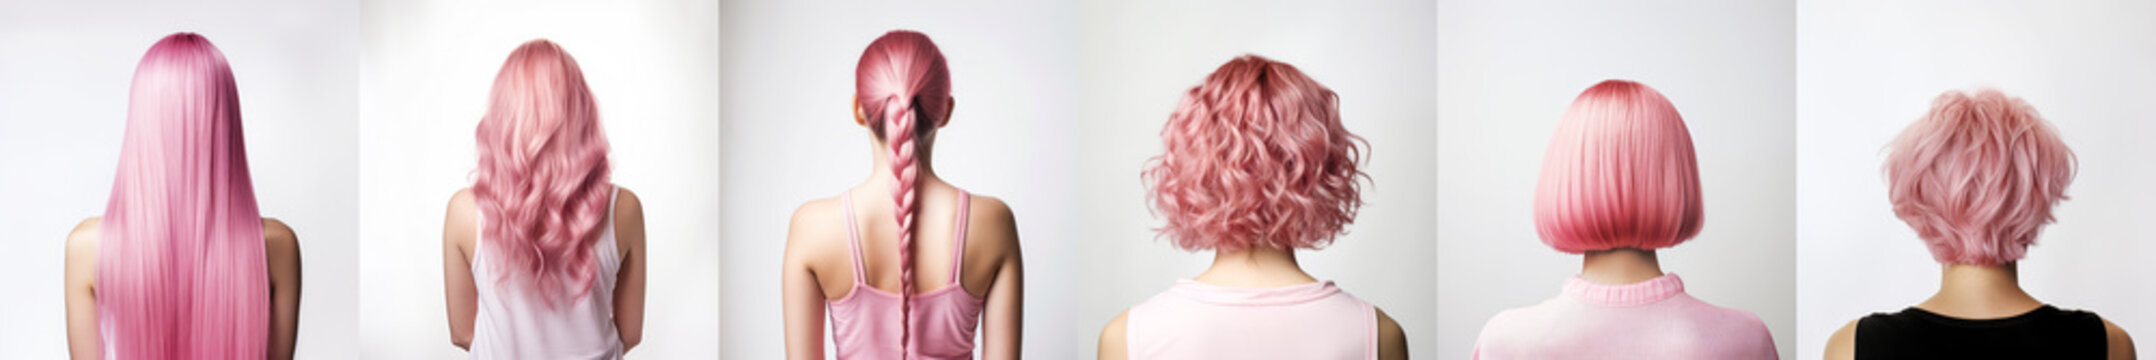 various haircuts for woman with pink dyed hair - long straight, wavy, braided ponytail, small perm, 